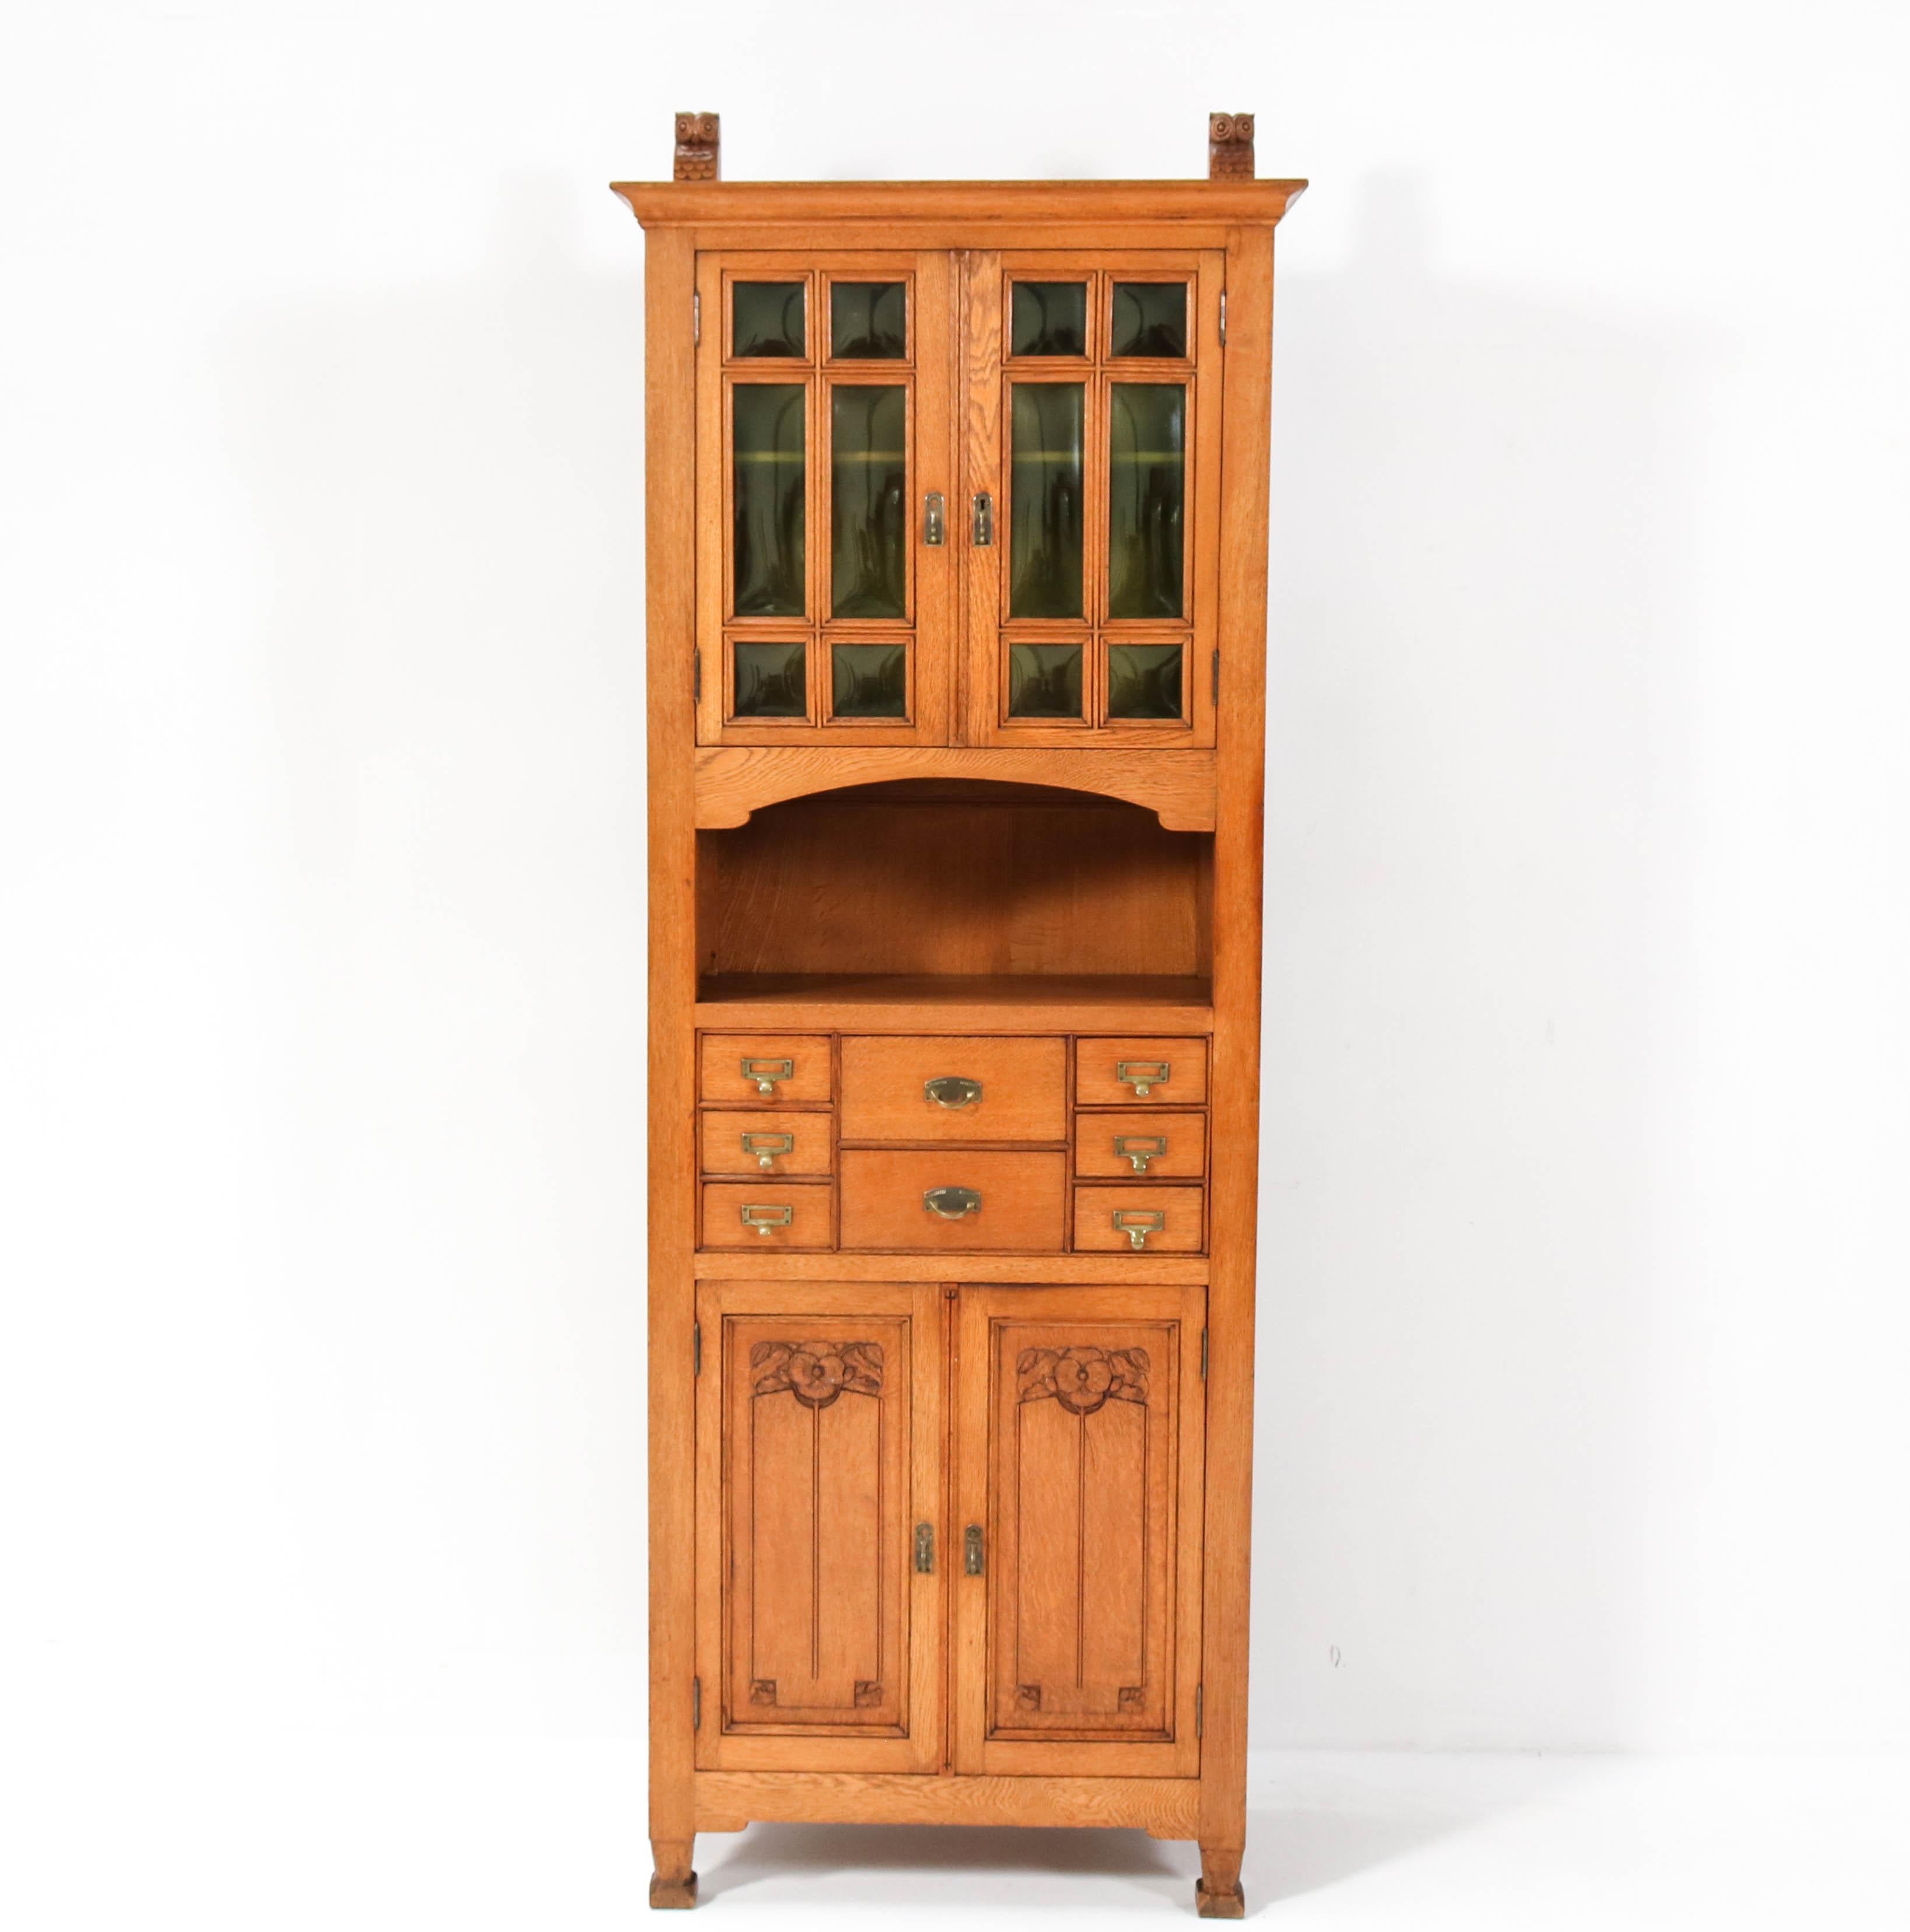 Magnificent and ultra rare Arts & Crafts Art Nouveau cabinet
Design attributed to Kobus de Graaff.
Striking Dutch design from the 1900s.
Solid oak with stylish hand-carved owls on top of the cabinet
Original green glass and original brass